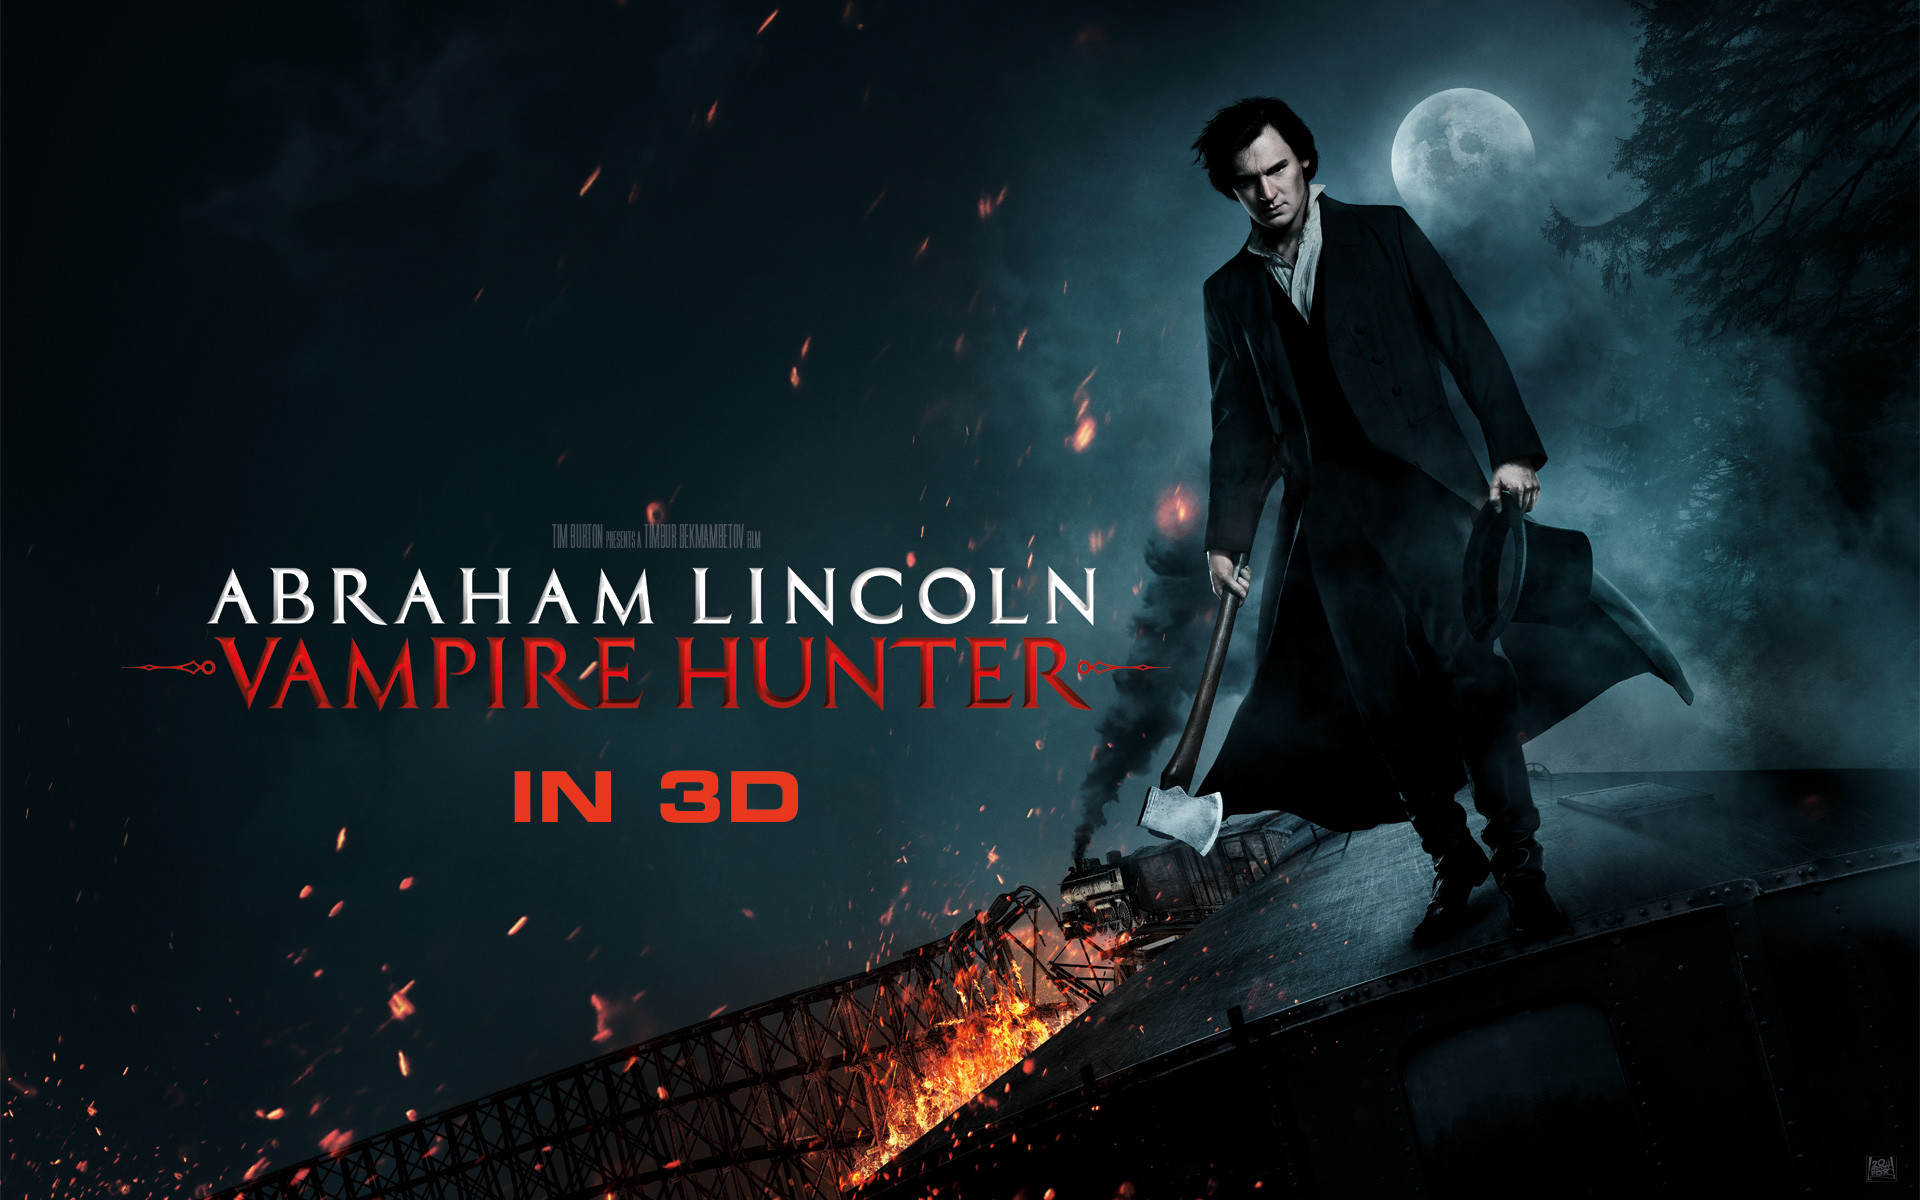 1920x1200 Abraham Lincoln: Vampire Hunter HD Wallpaper | Background Image |   | ID:334239 - Wallpaper Abyss